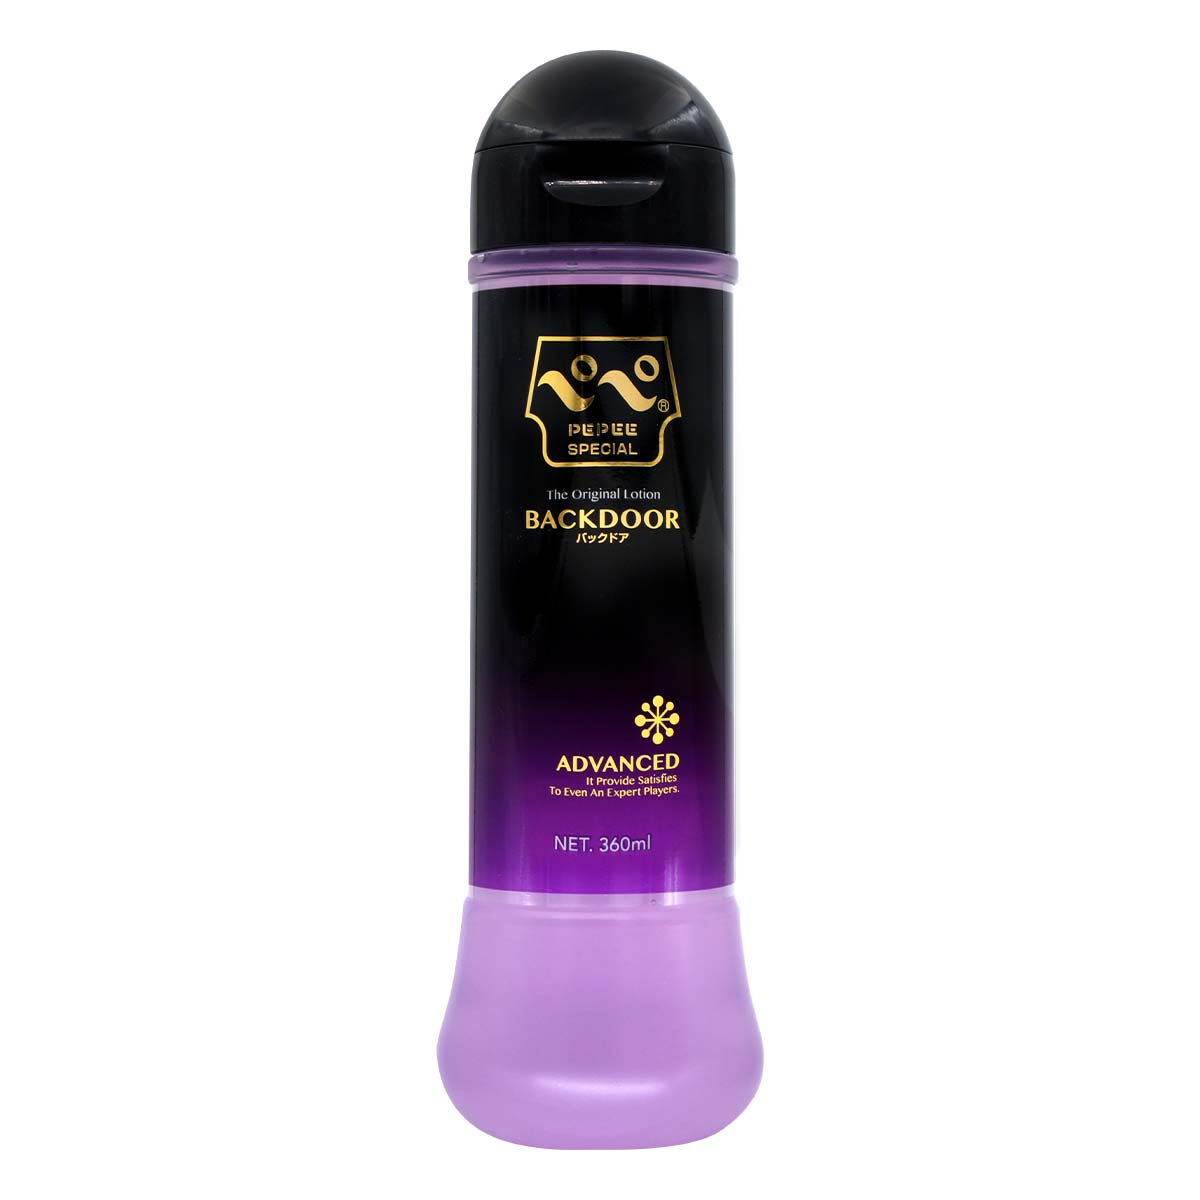 PEPEE Special Backdoor 360ml water-based lubricant-thumb_2